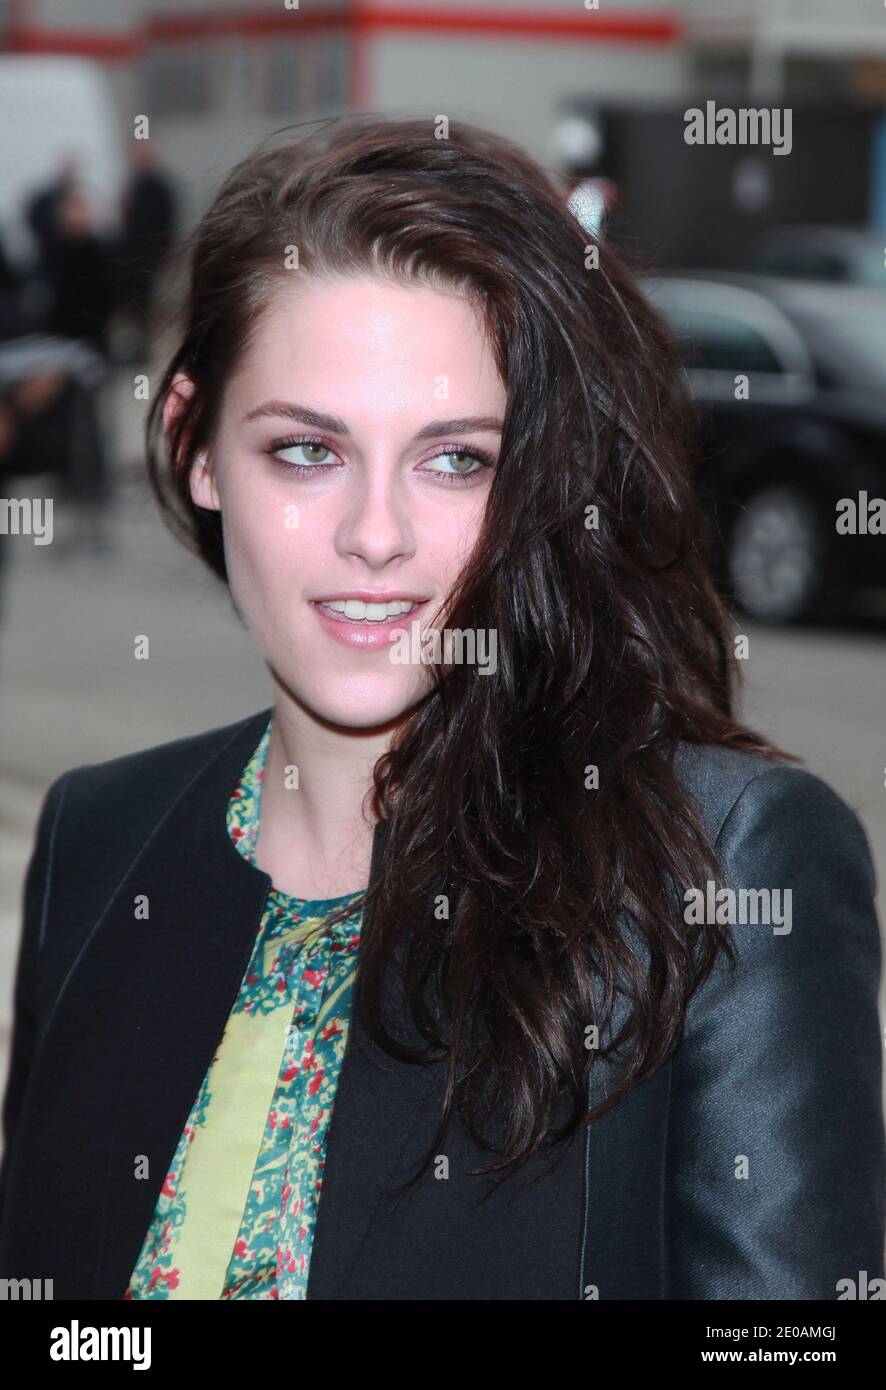 Kristen Stewart attends Balenciaga's Fall-Winter 2012-2013 Ready-To-Wear collection show held at Quai Javel in Paris, France, on March 1, 2012, as part of the Paris Fashion Week. Photo by Denis Guignebourg/ABACAPRESS.COM Stock Photo